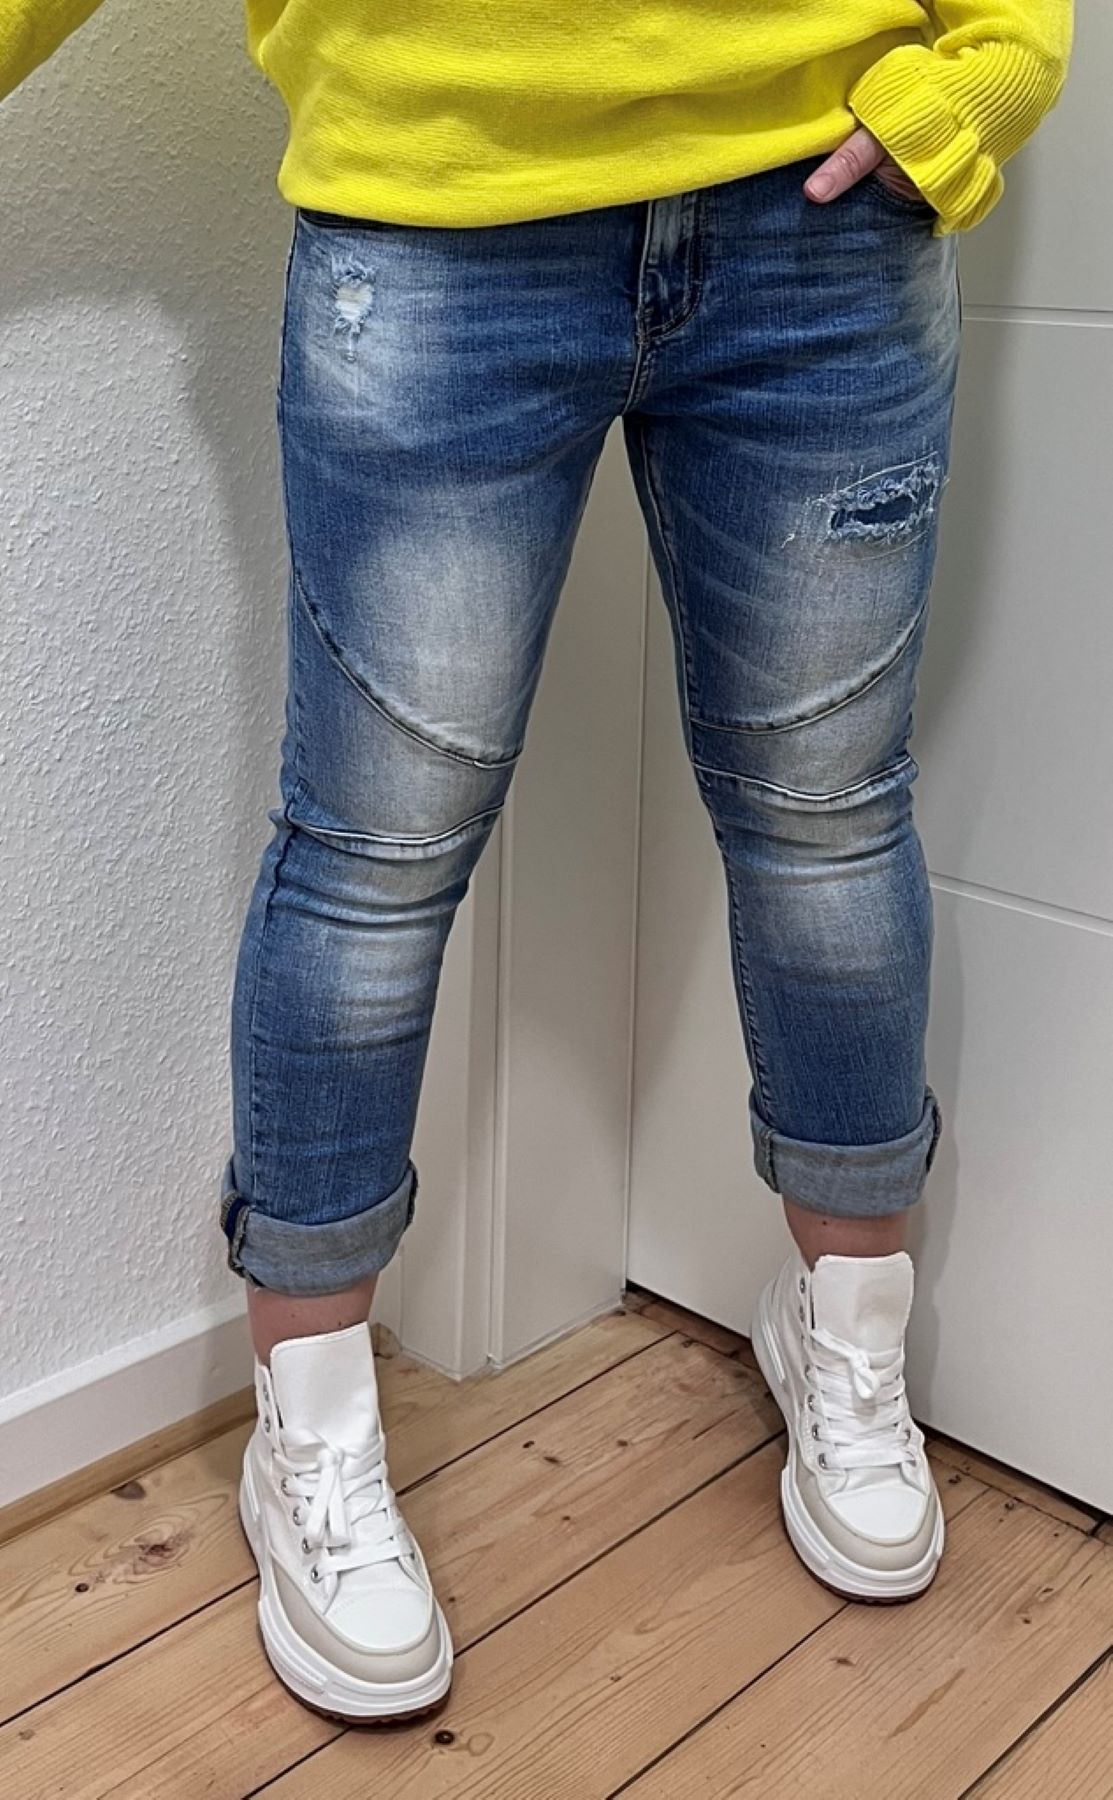 Jeans style